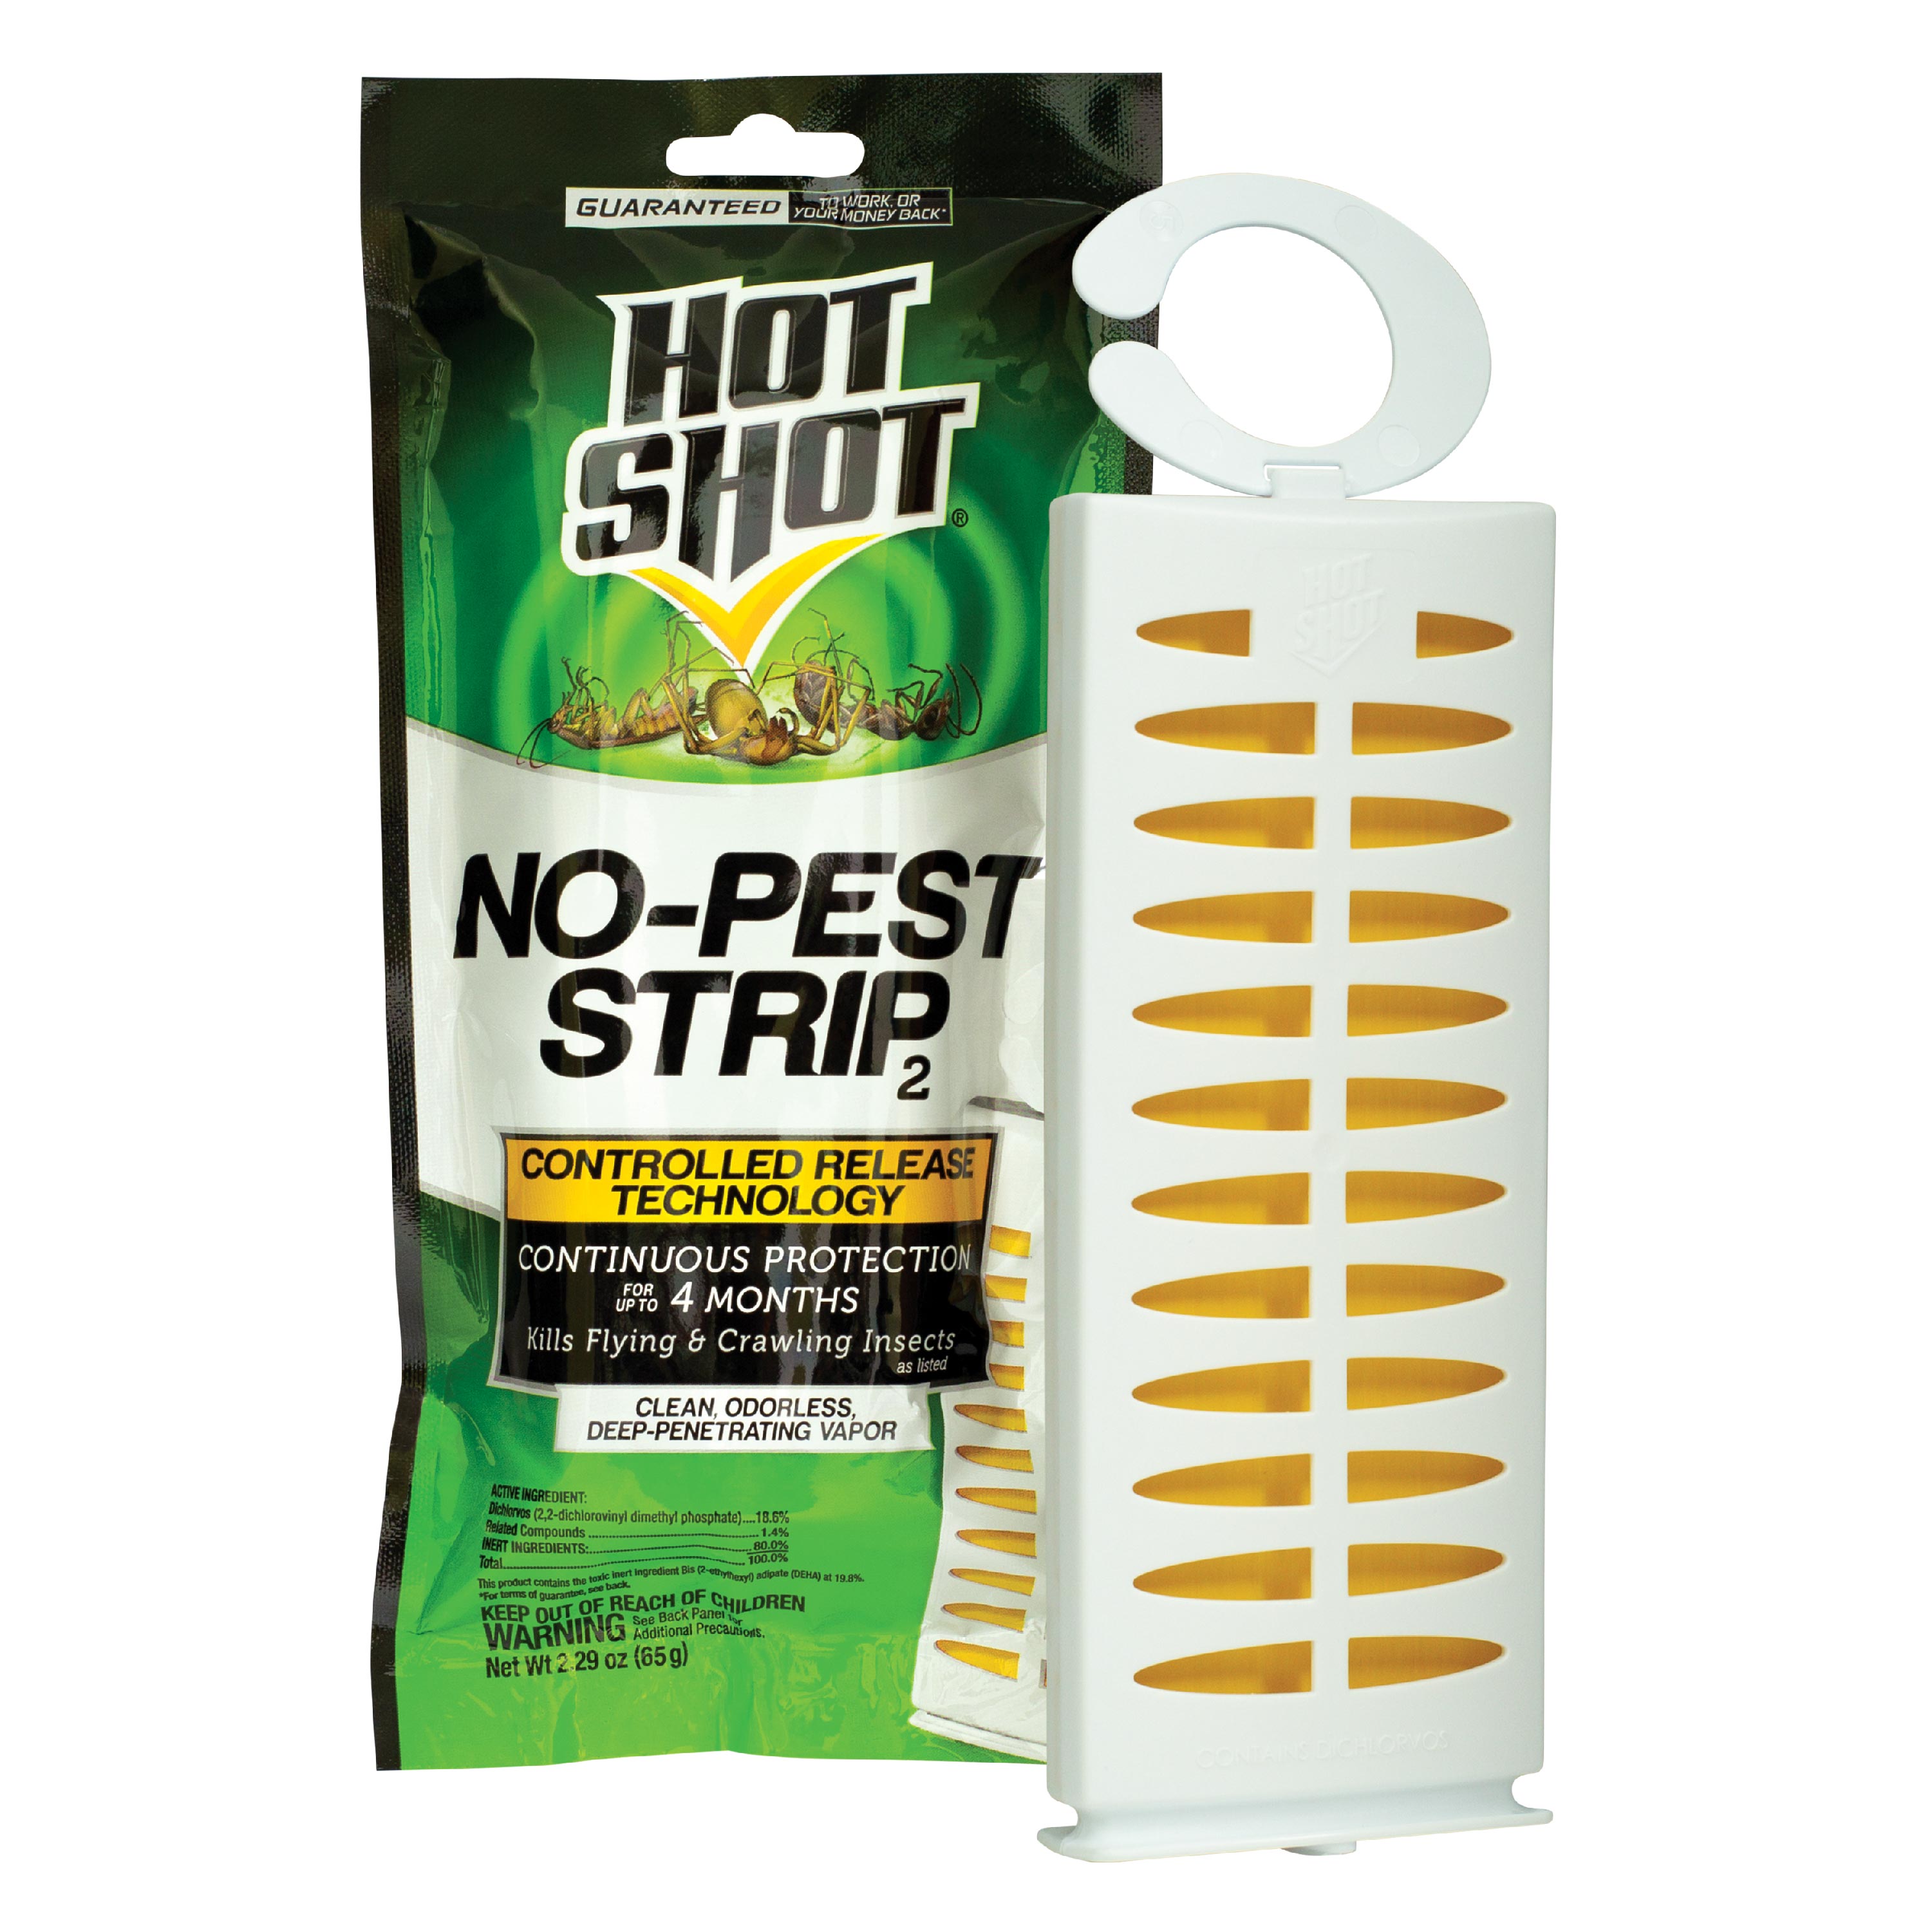 Fruit Fly BarPro – 4 Month Protection Against Flies, Cockroaches & Other  Pests. Fly Traps for Indoors/Outdoor. Better Than Mosquito Zapper